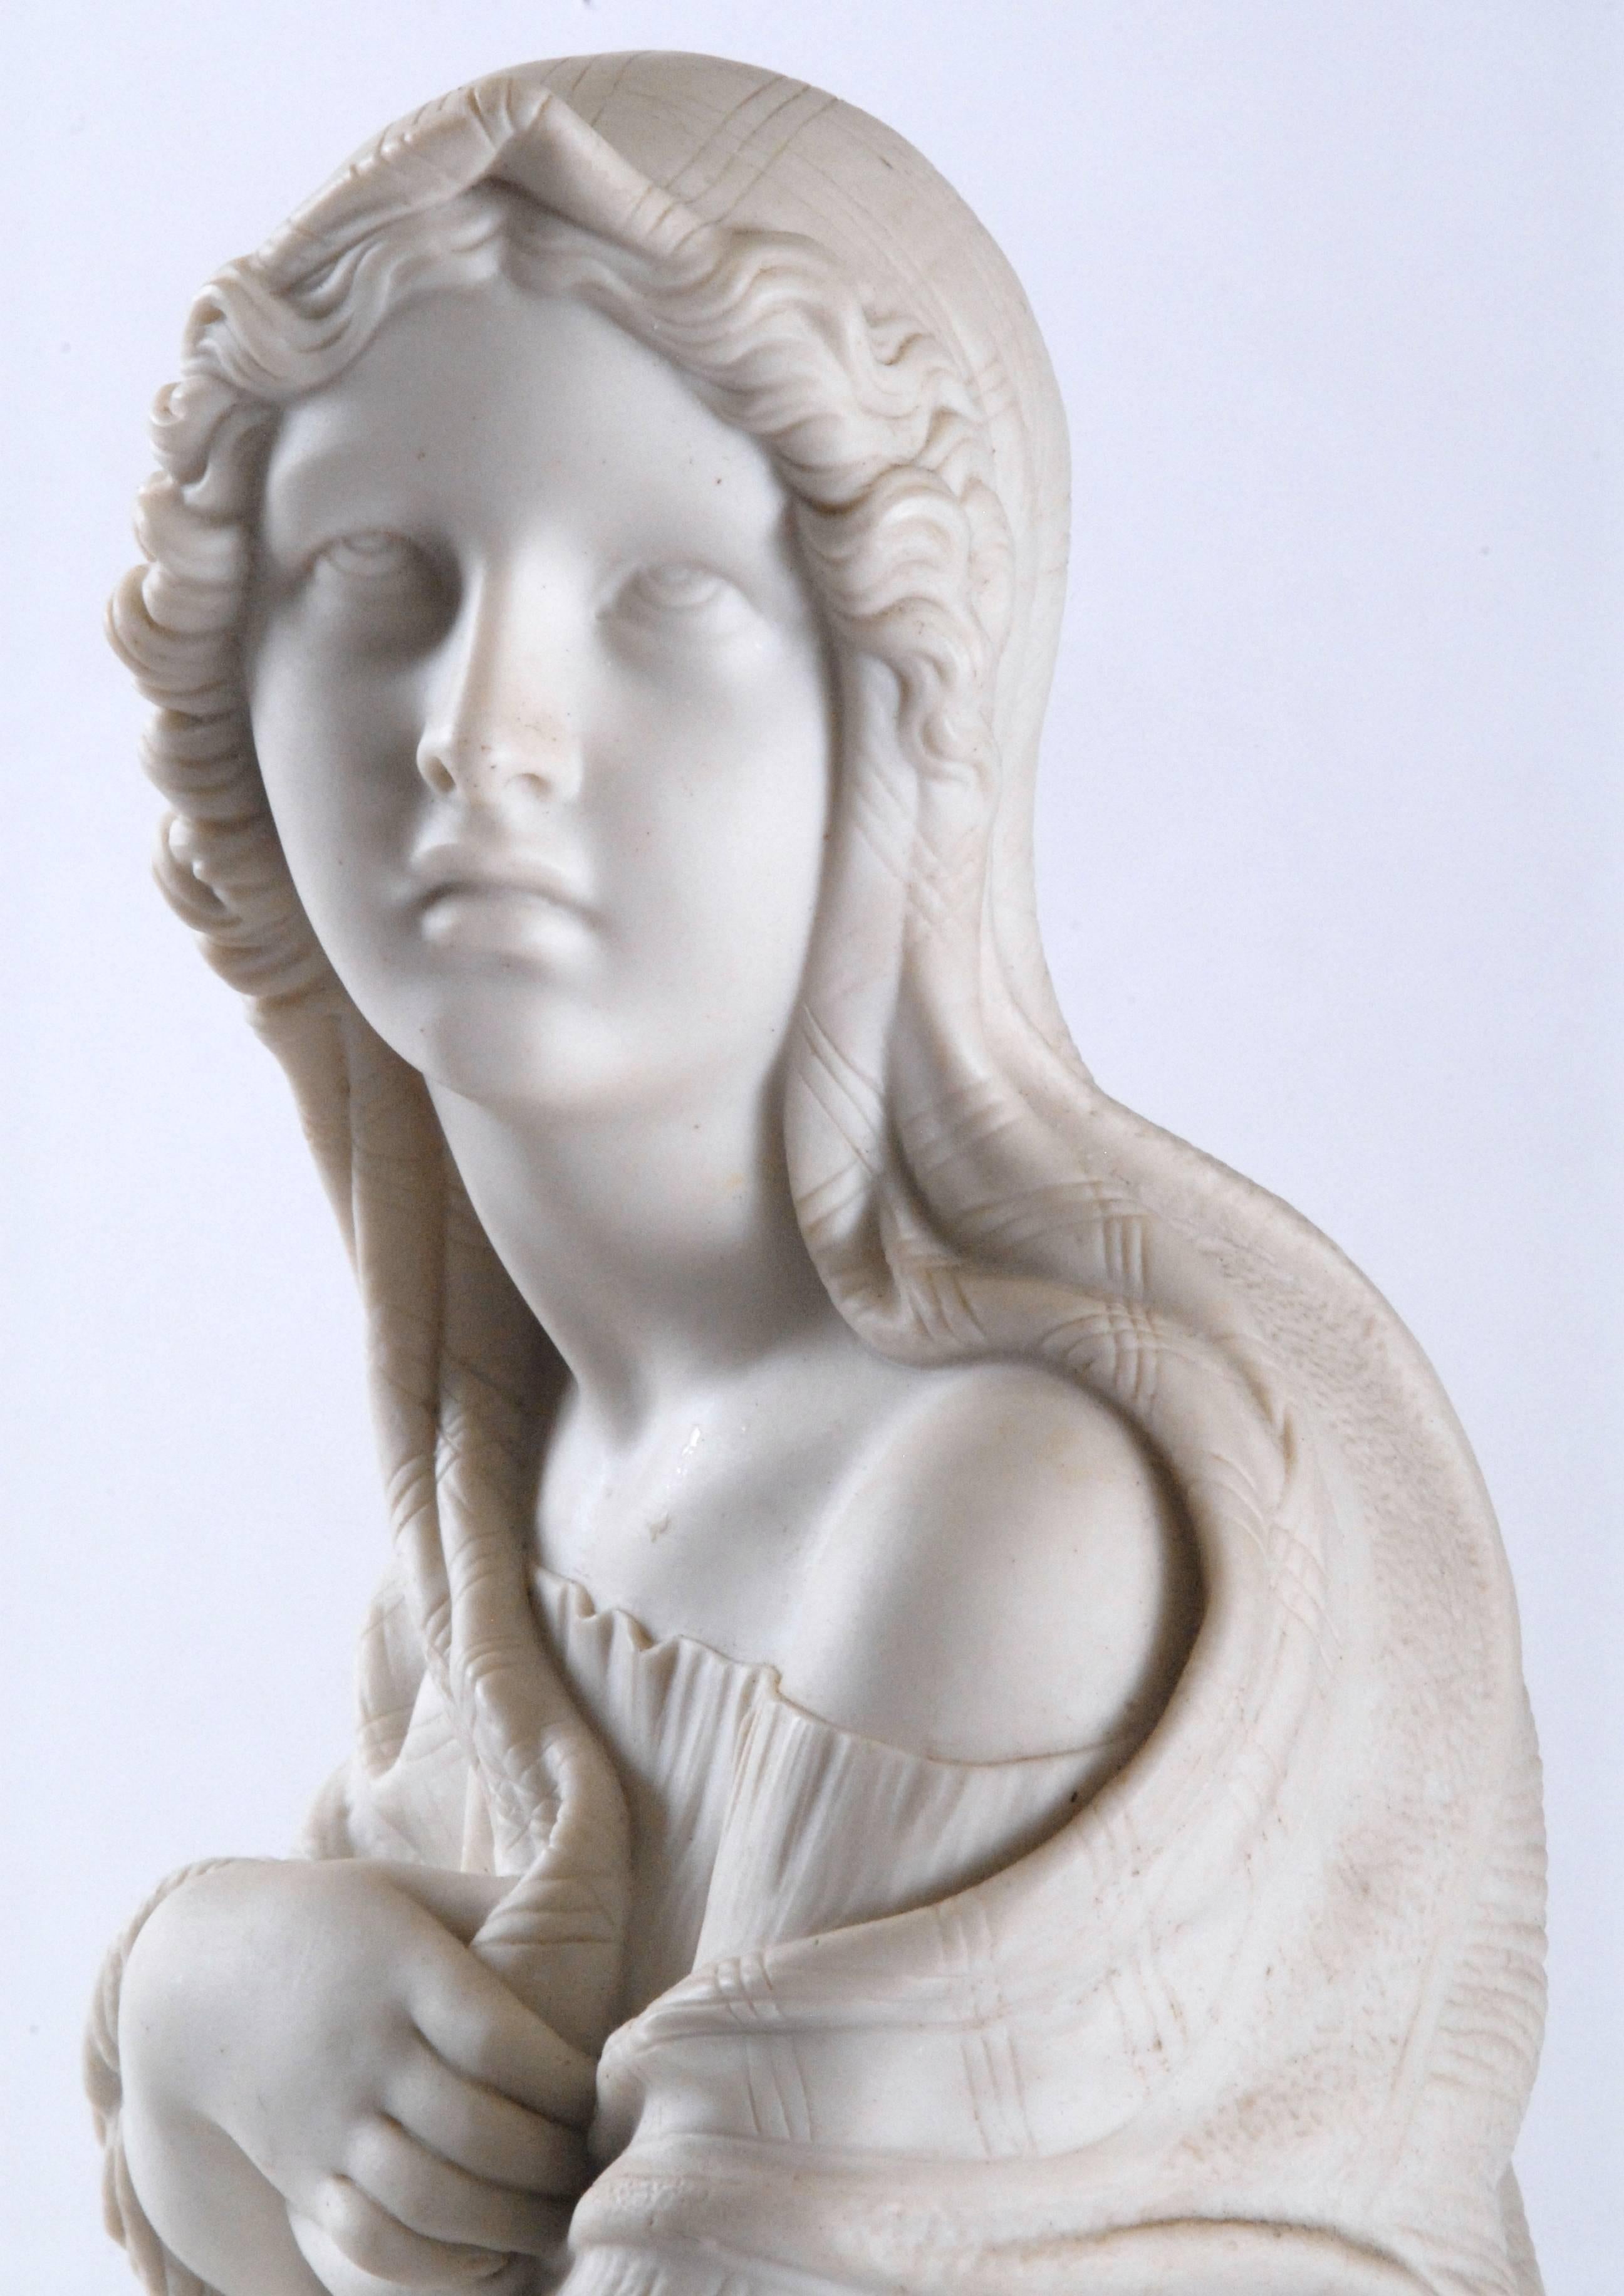 19th Century Copeland Parian Statue, 'Storm' by William Brodie, circa 1858 For Sale 1